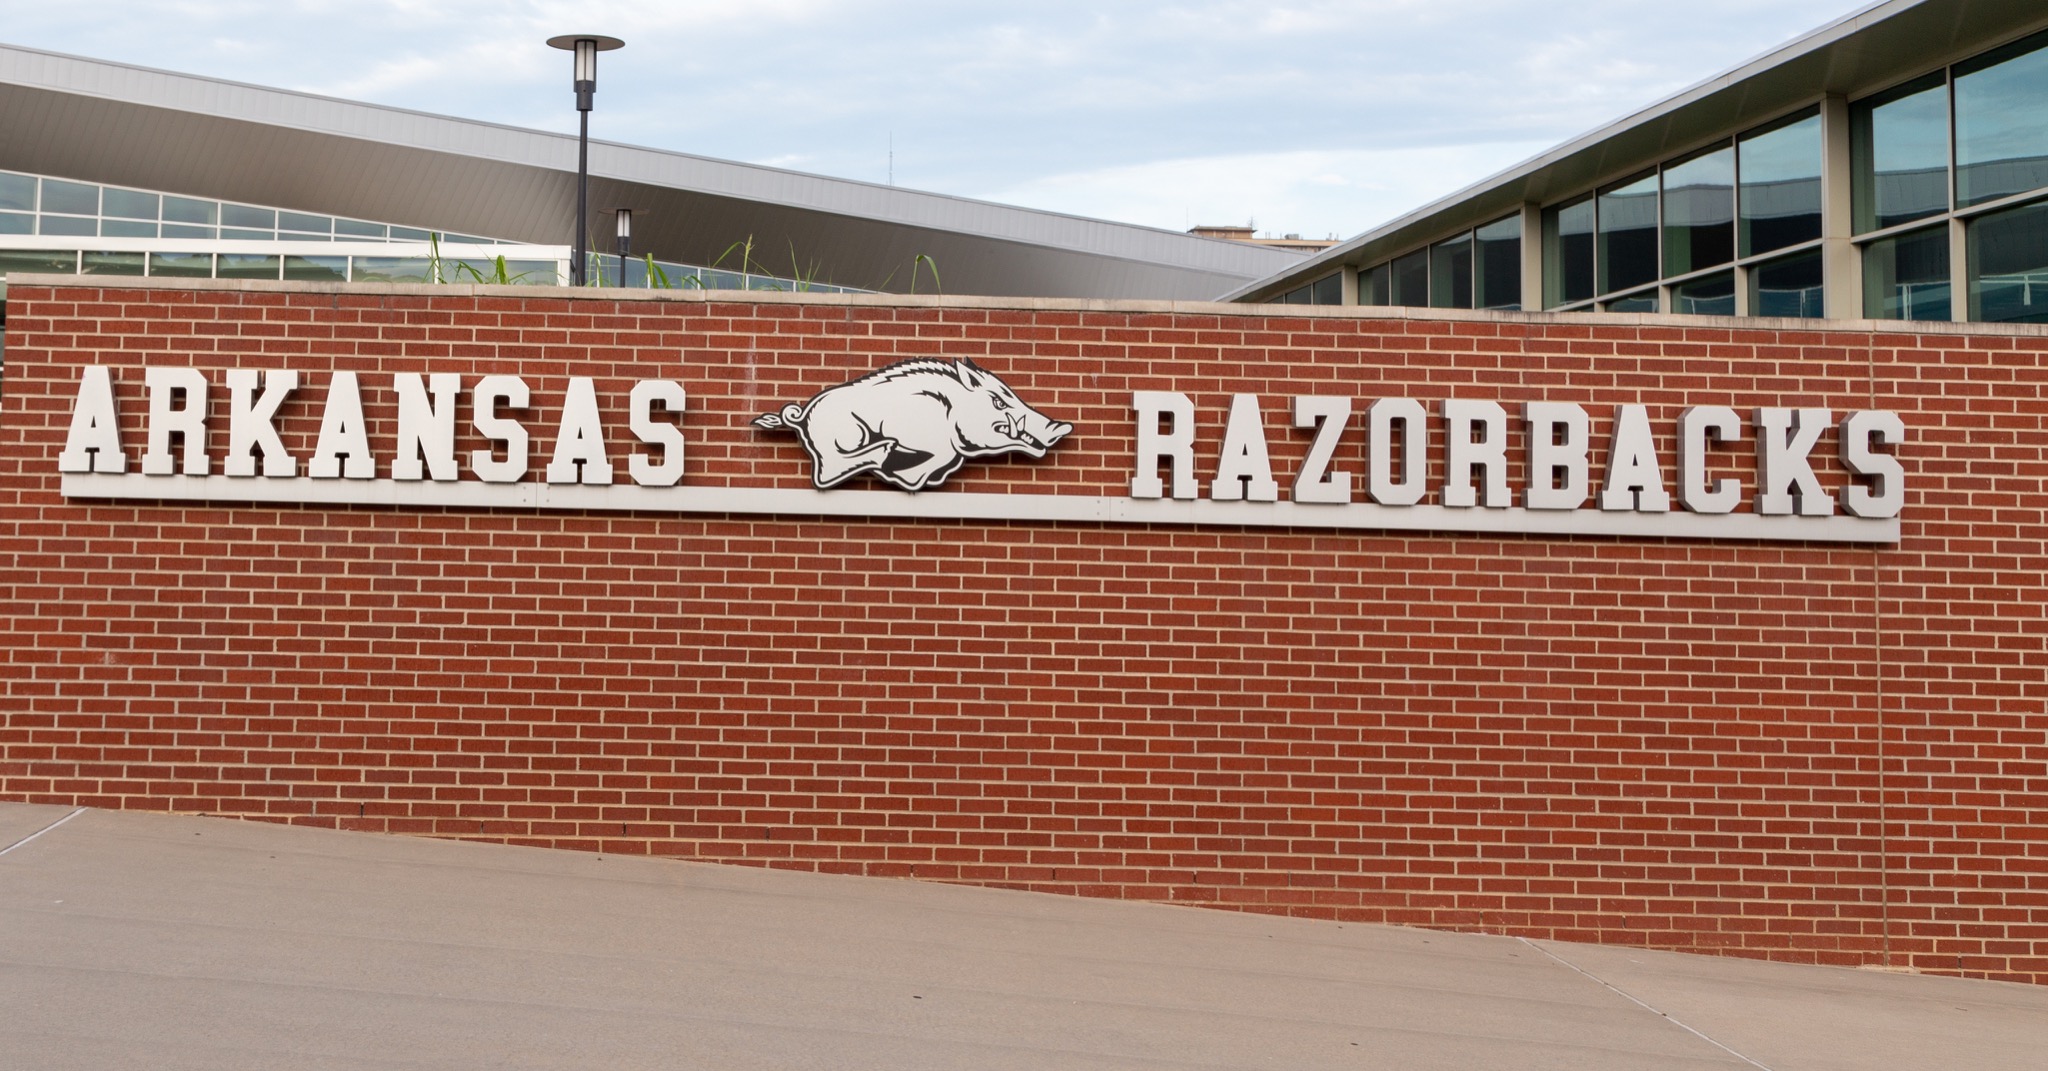 Two Arkansas Razorback Football Players Suspended For Flirting With MSU Cheerleaders